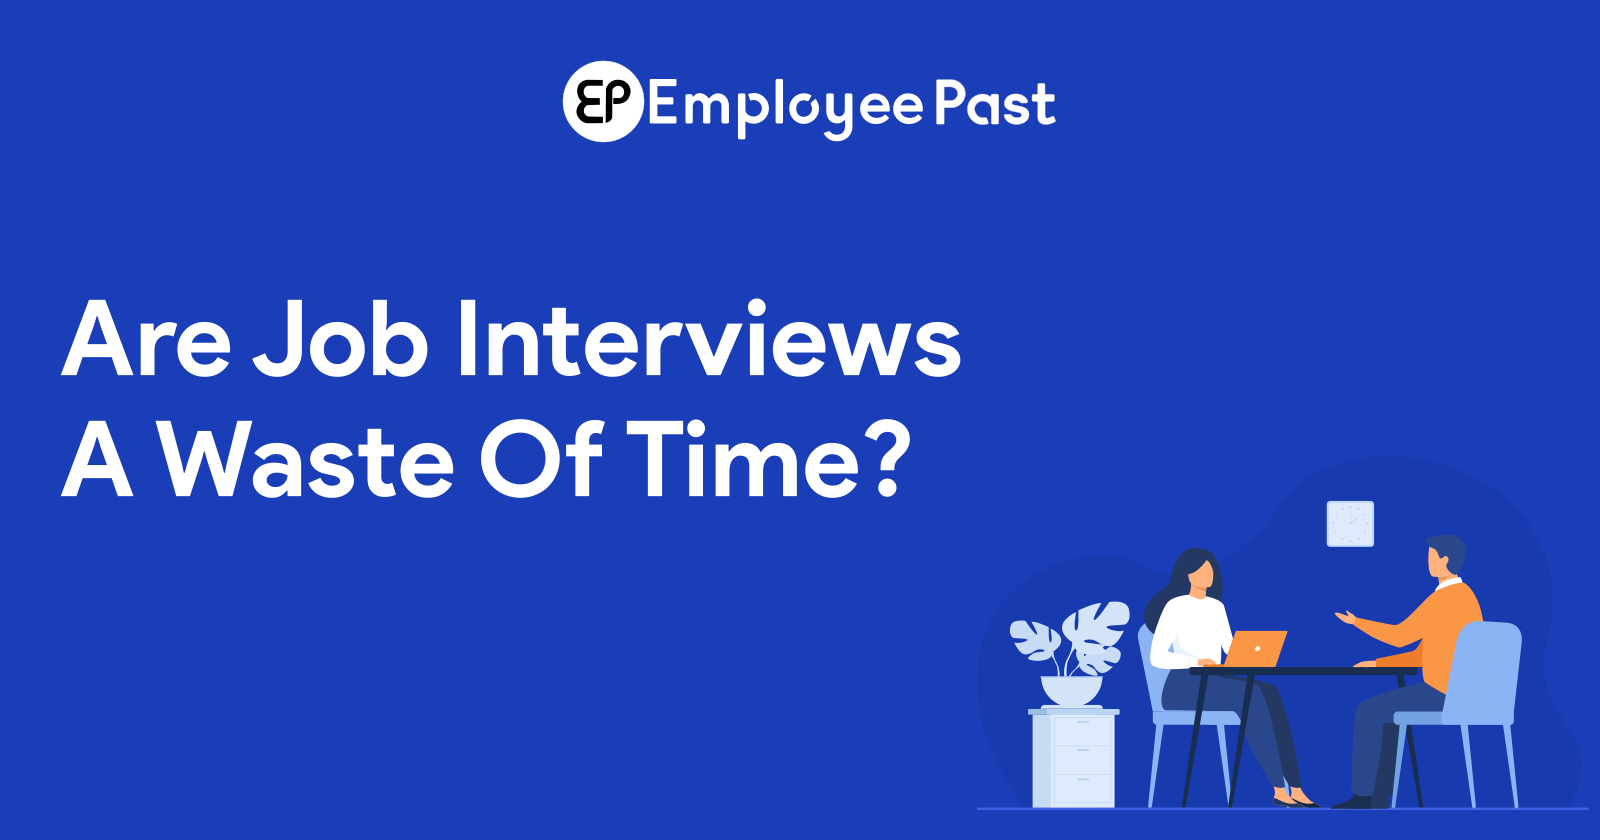 Are Job Interviews A Waste Of Time?